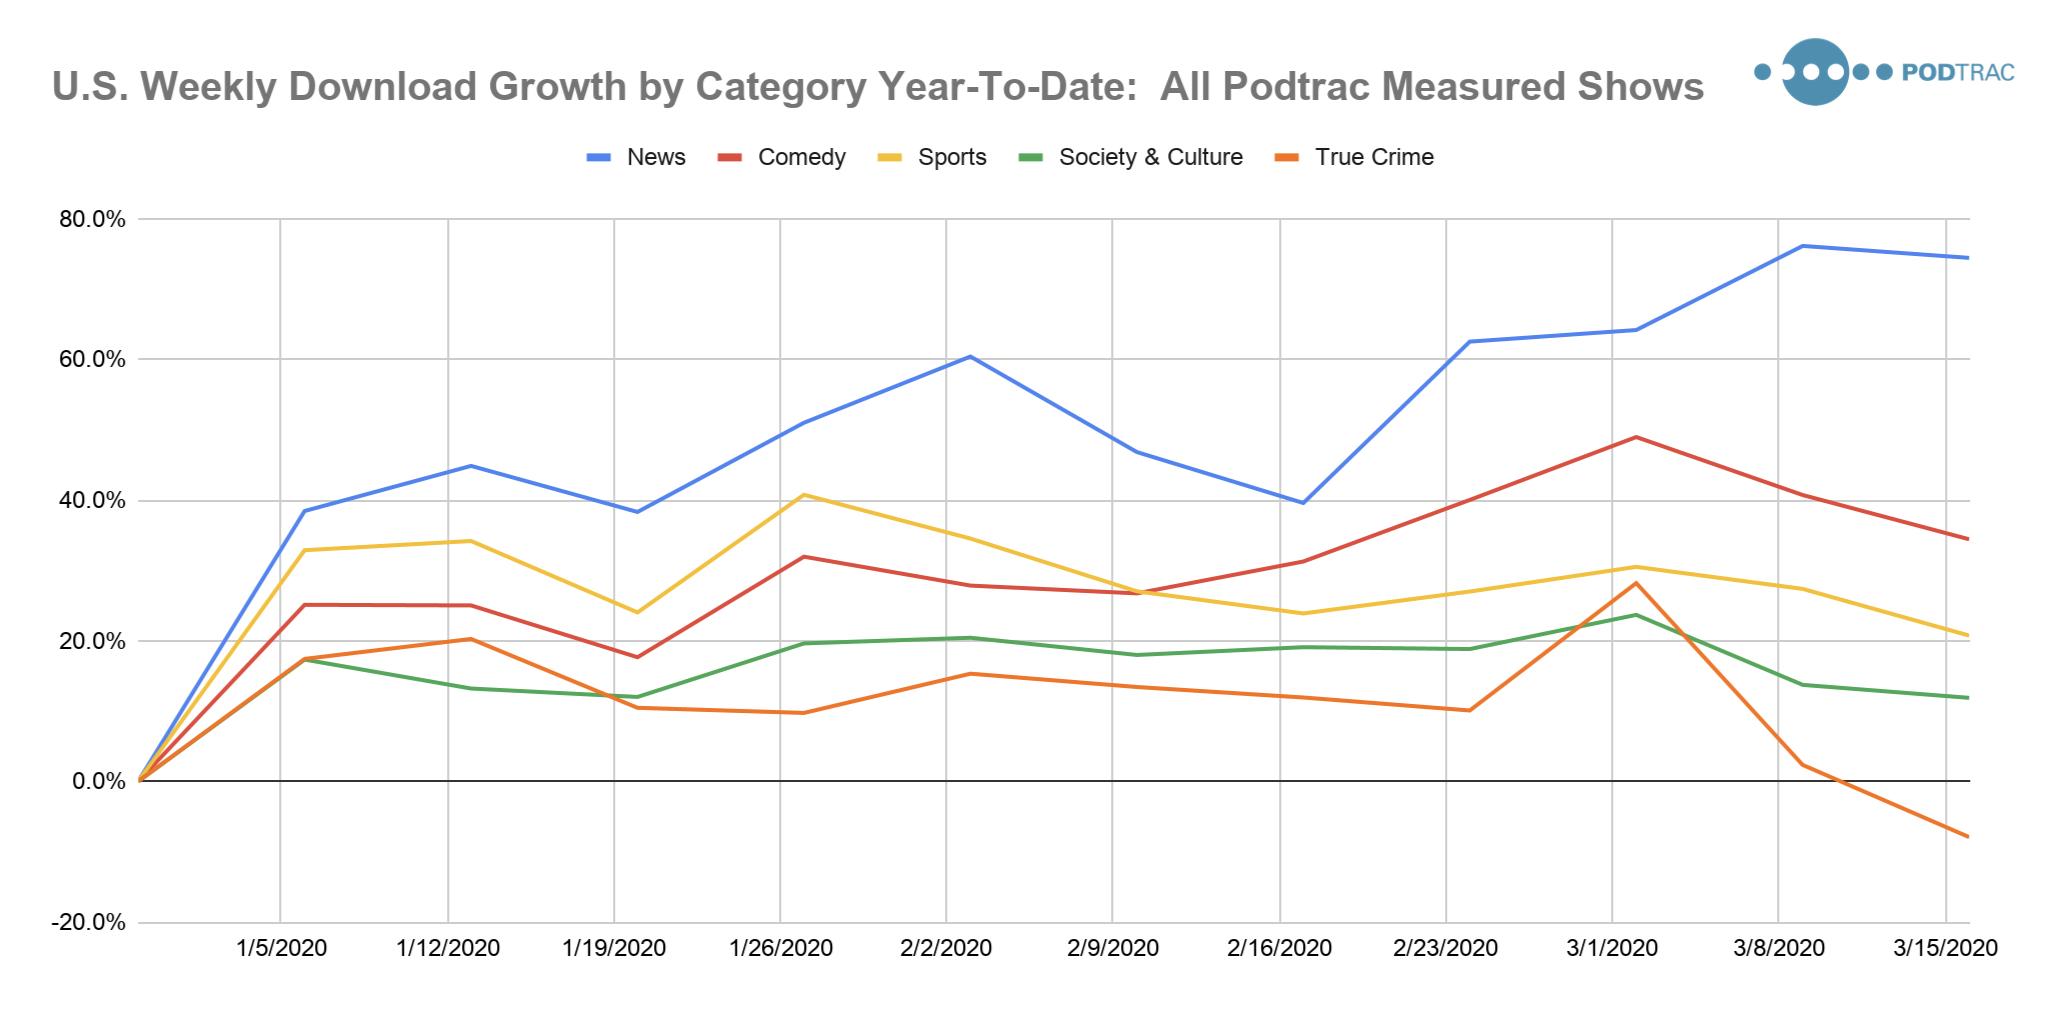 Year-To-Date U.S. Weekly Podcast Download Growth for Top Categories